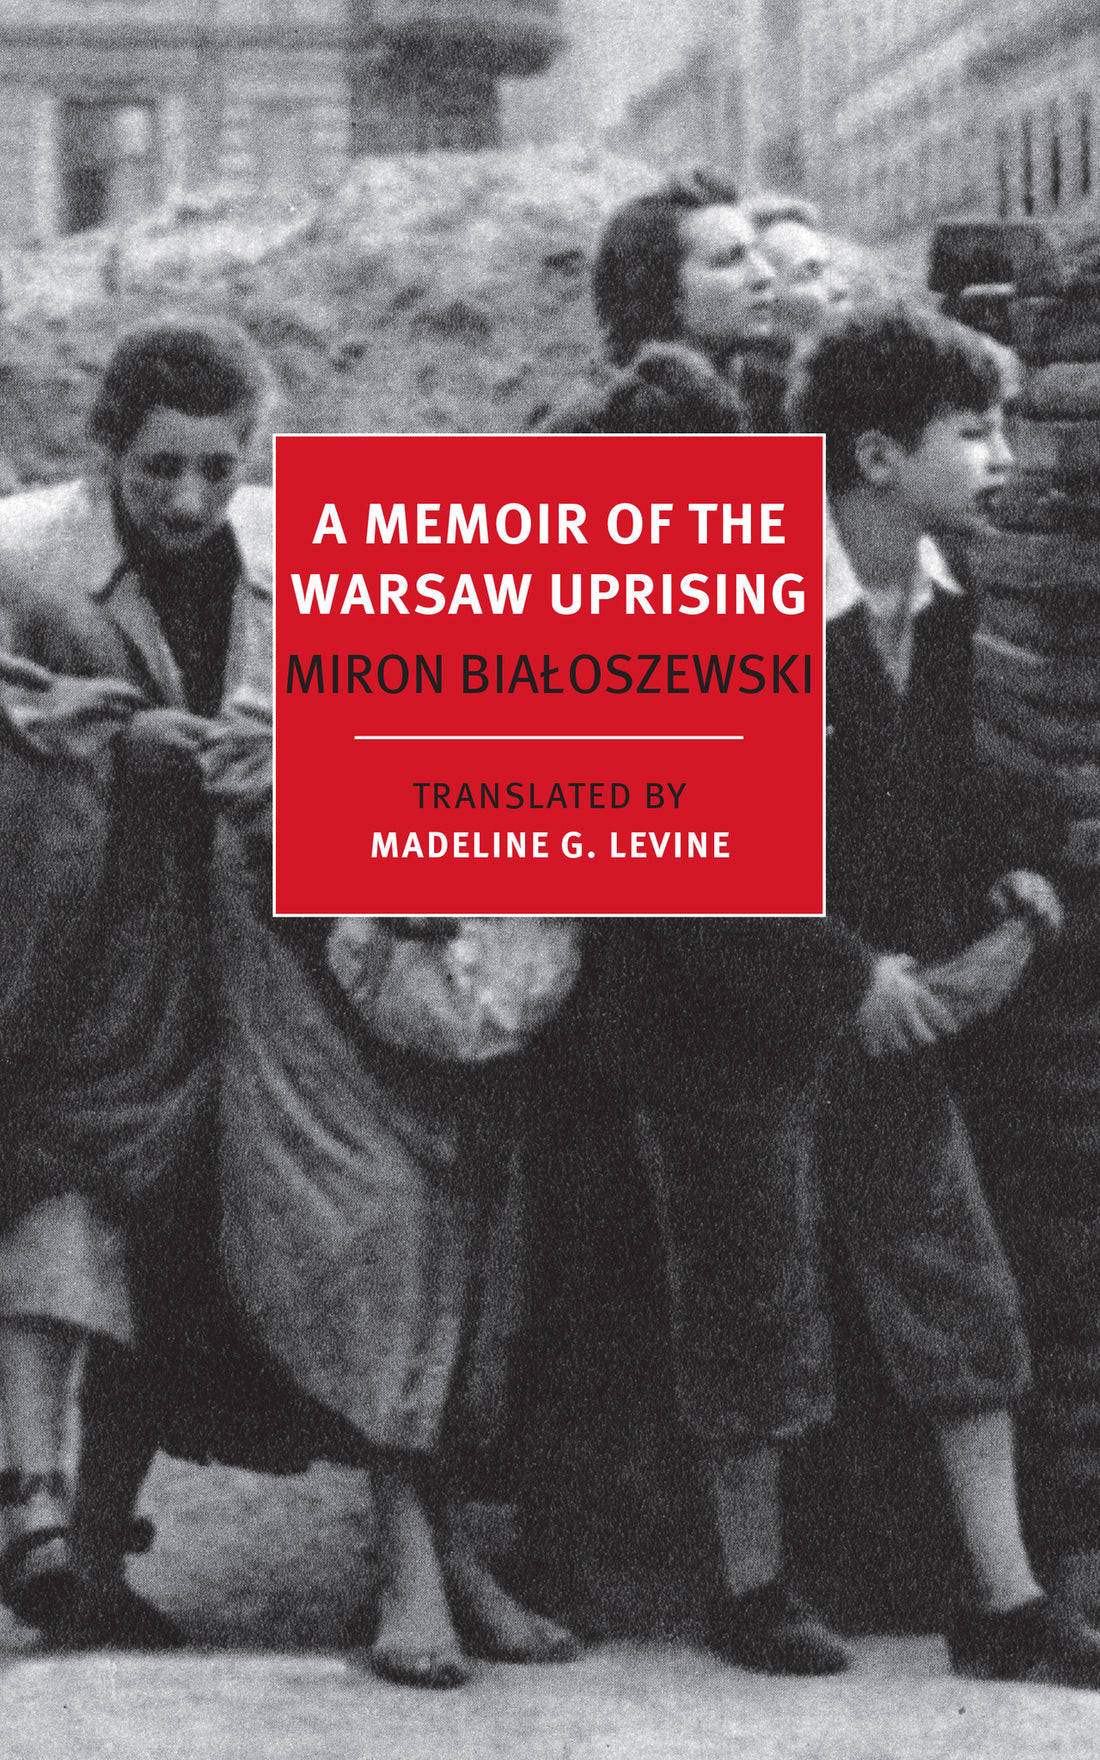 Event with Madeline G. Levine, translator of 'The Memoir of the Warsaw Uprising'